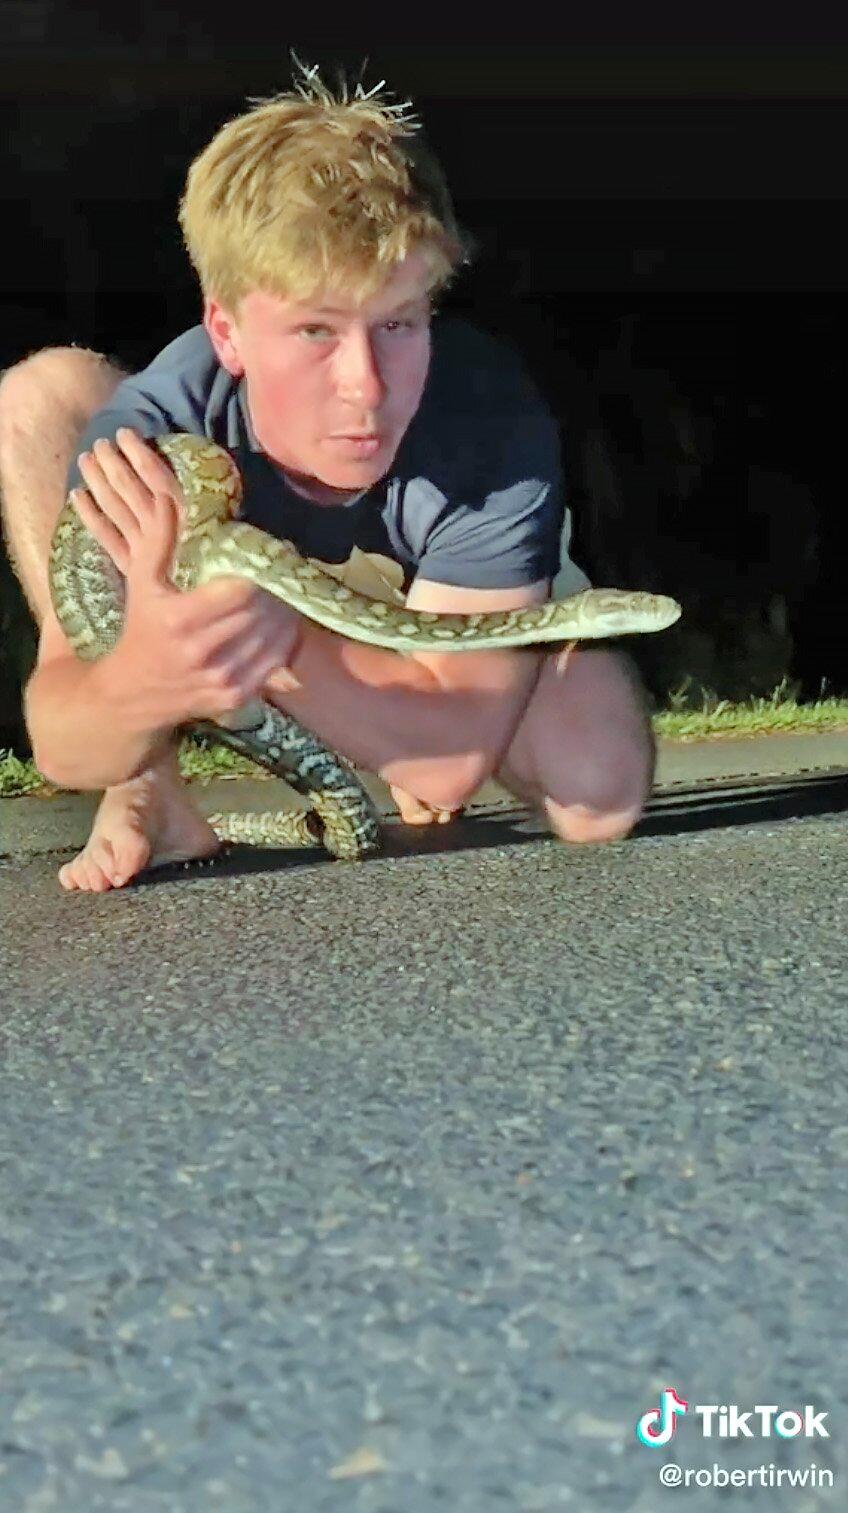 Robert Irwin Bravely Rescues Large Snake from Middle of the Road with His Bare Hands – Watch!